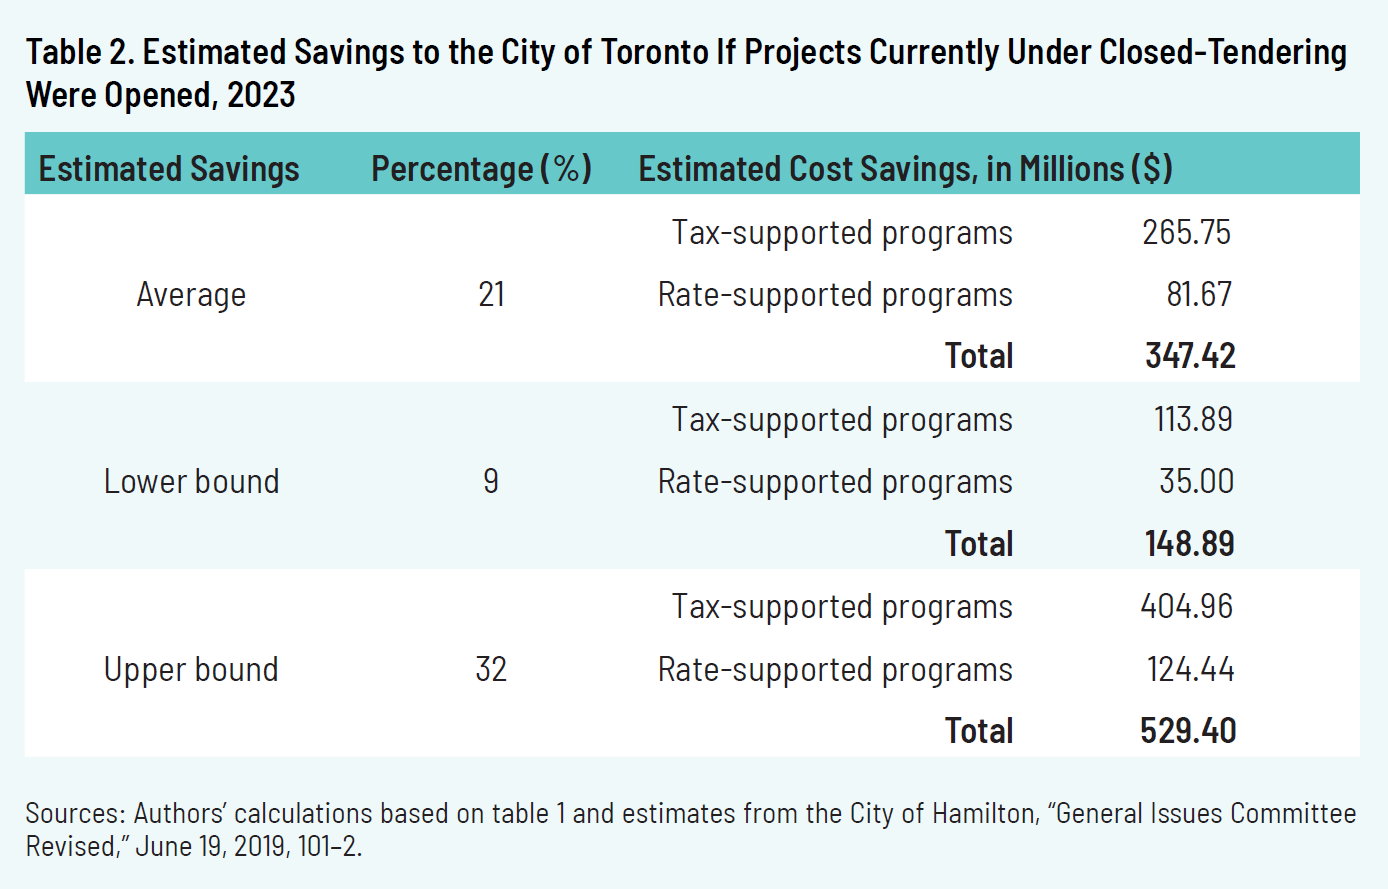 Table 2. Estimated Savings to the City of Toronto if Projects Currently Under Closed-Tendering Were Opened, 2023